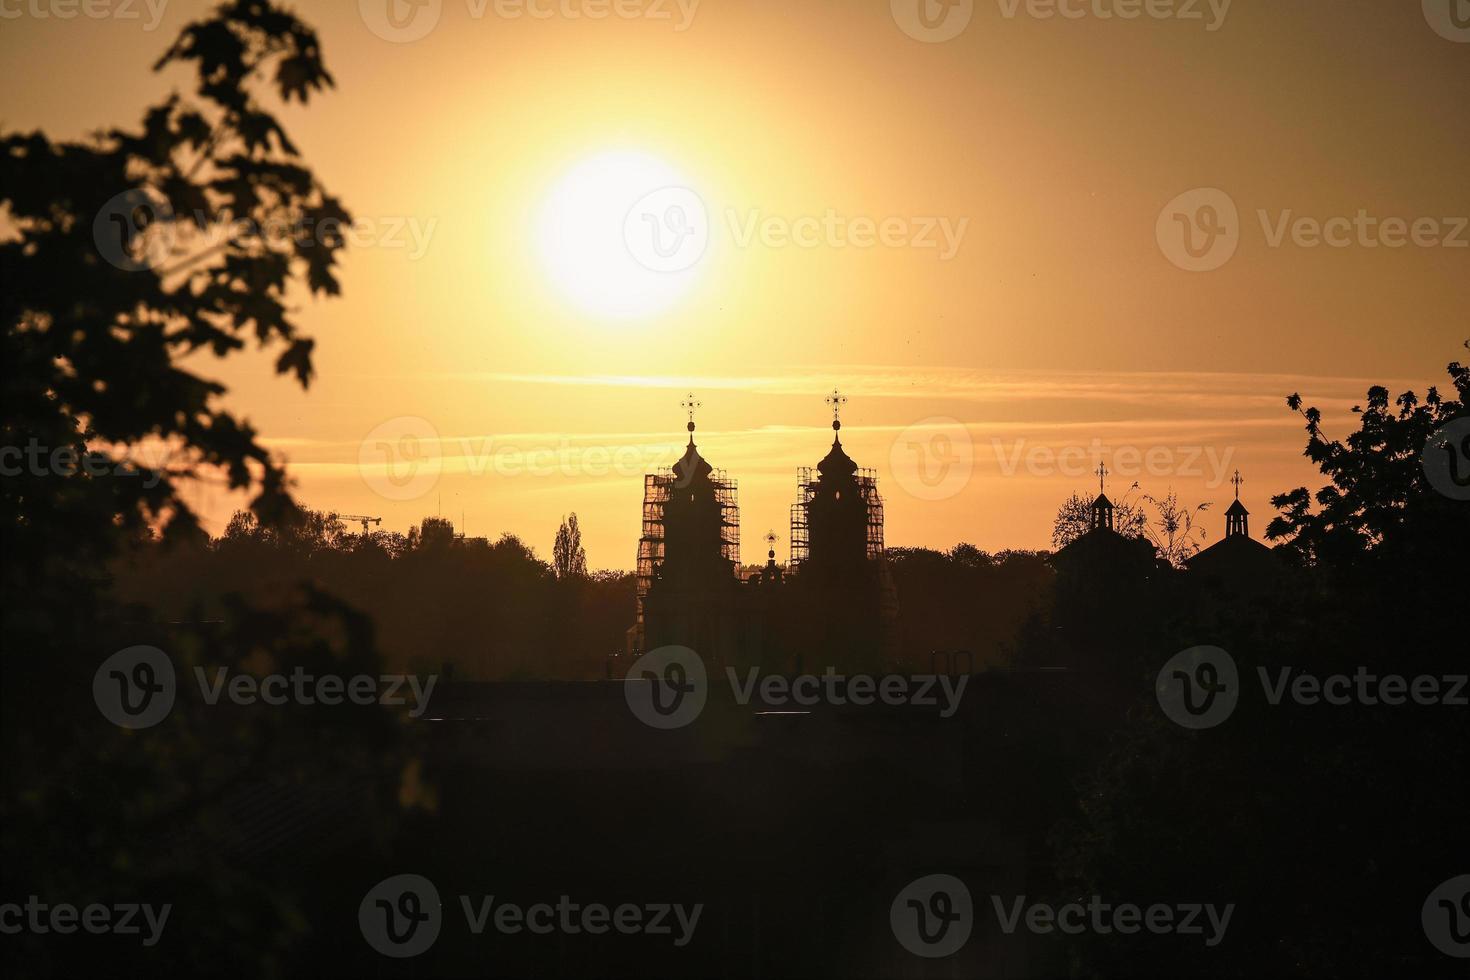 Kotryna's church with scaffolding for reconstruction silhouette in Vilnius orange and black sunset sky with tree branches and other buildings visible photo